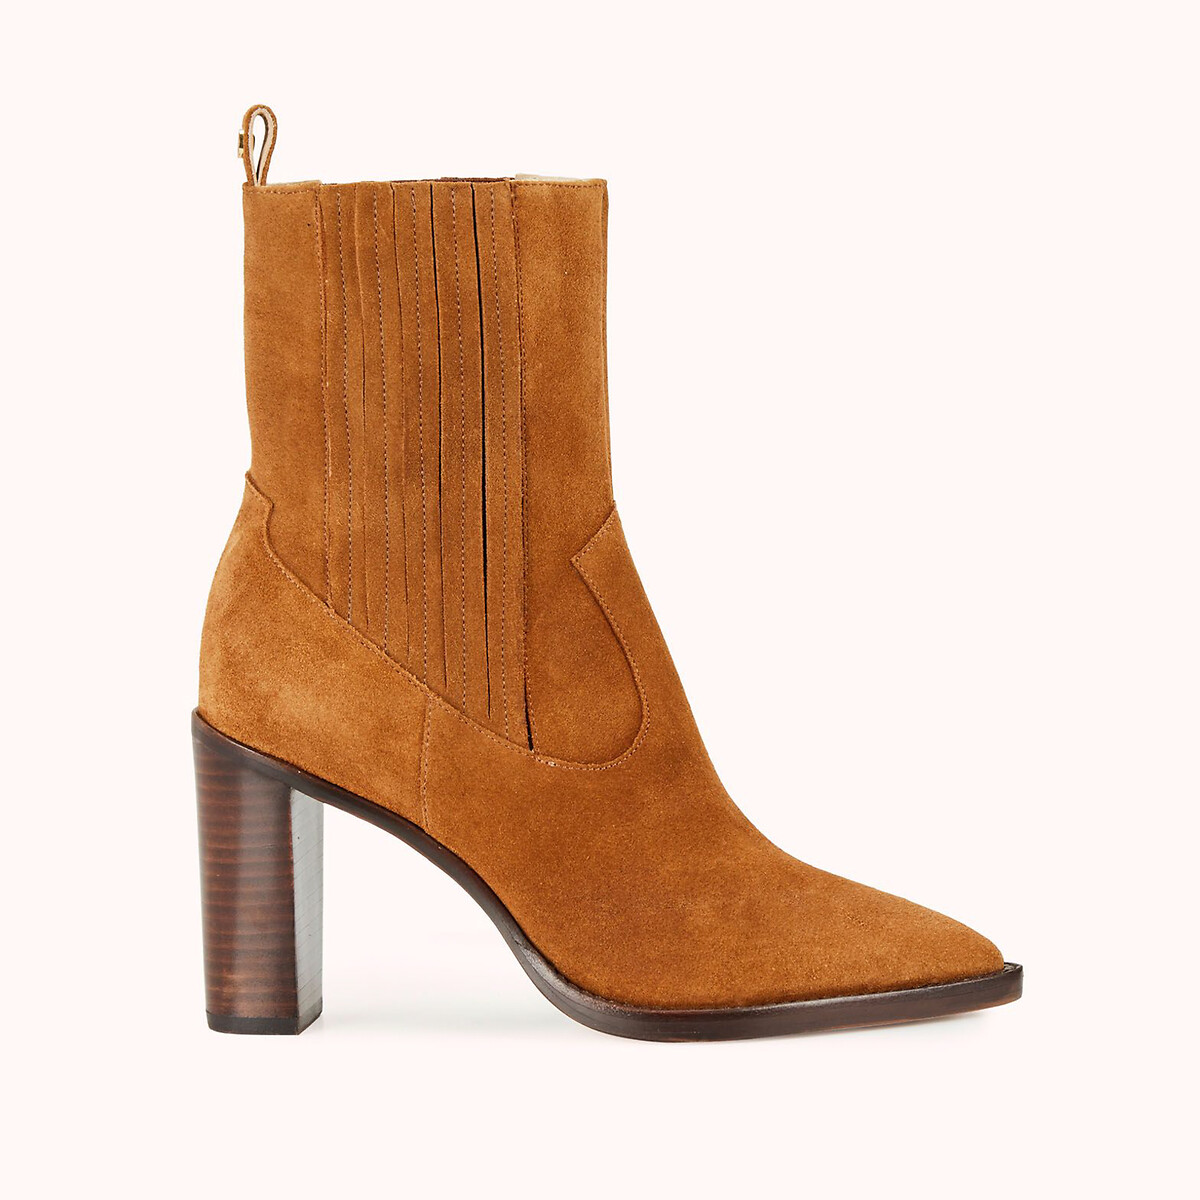 Zaeli Suede Cowboy Boots with Pointed Toe and Block Heel